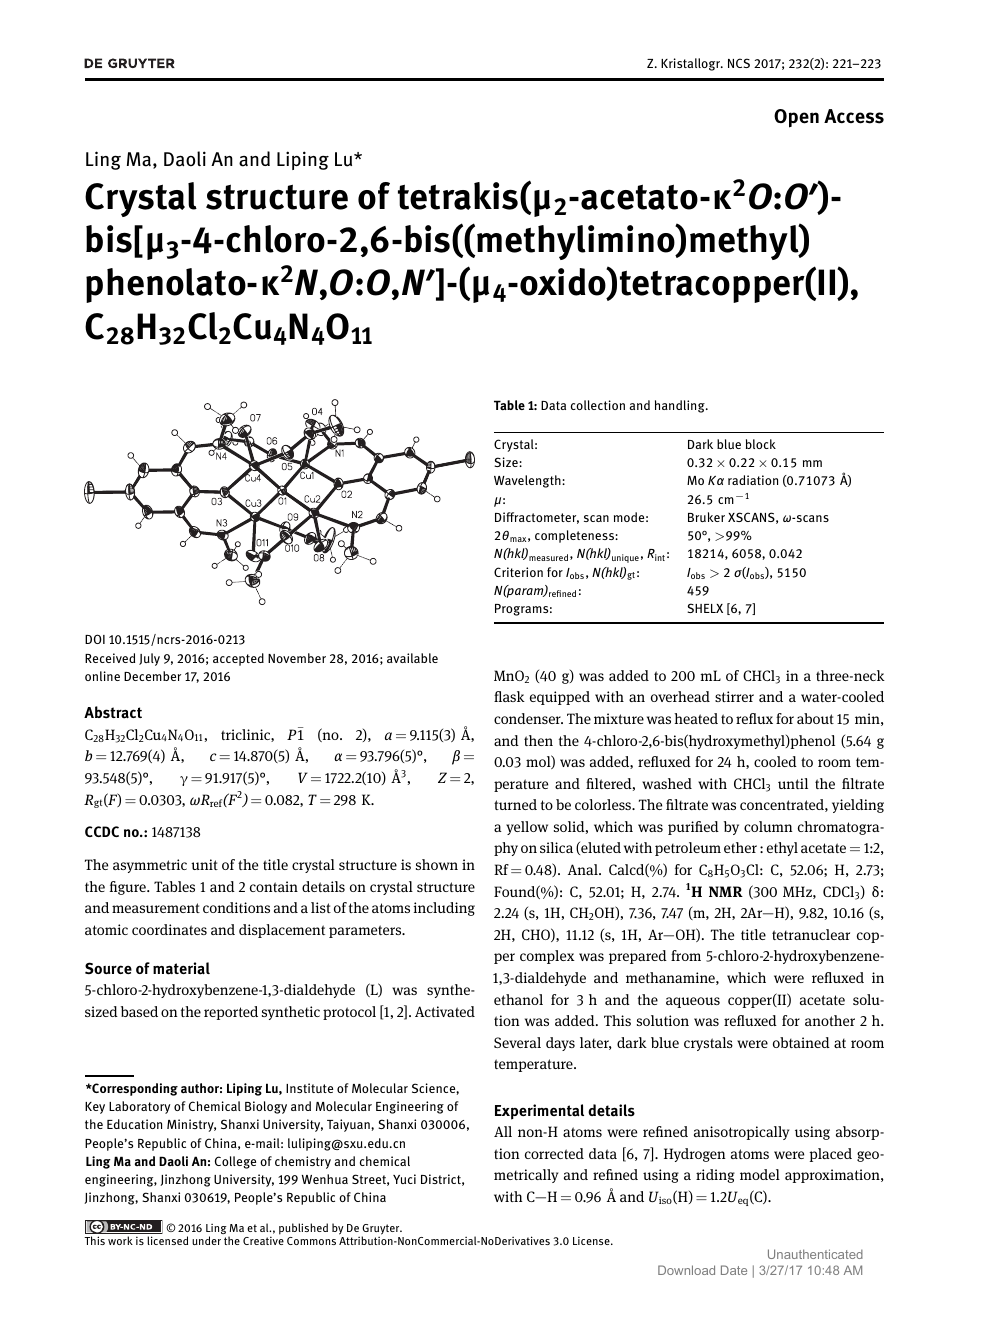 Crystal Structure Of Tetrakis M2 Acetato K2o O Bis M3 4 Chloro 2 6 Bis Methylimino Methyl Phenolato K2n O O N M4 Oxido Tetracopper Ii C28h32cl2cu4n4o11 Topic Of Research Paper In Biological Sciences Download Scholarly Article Pdf And Read